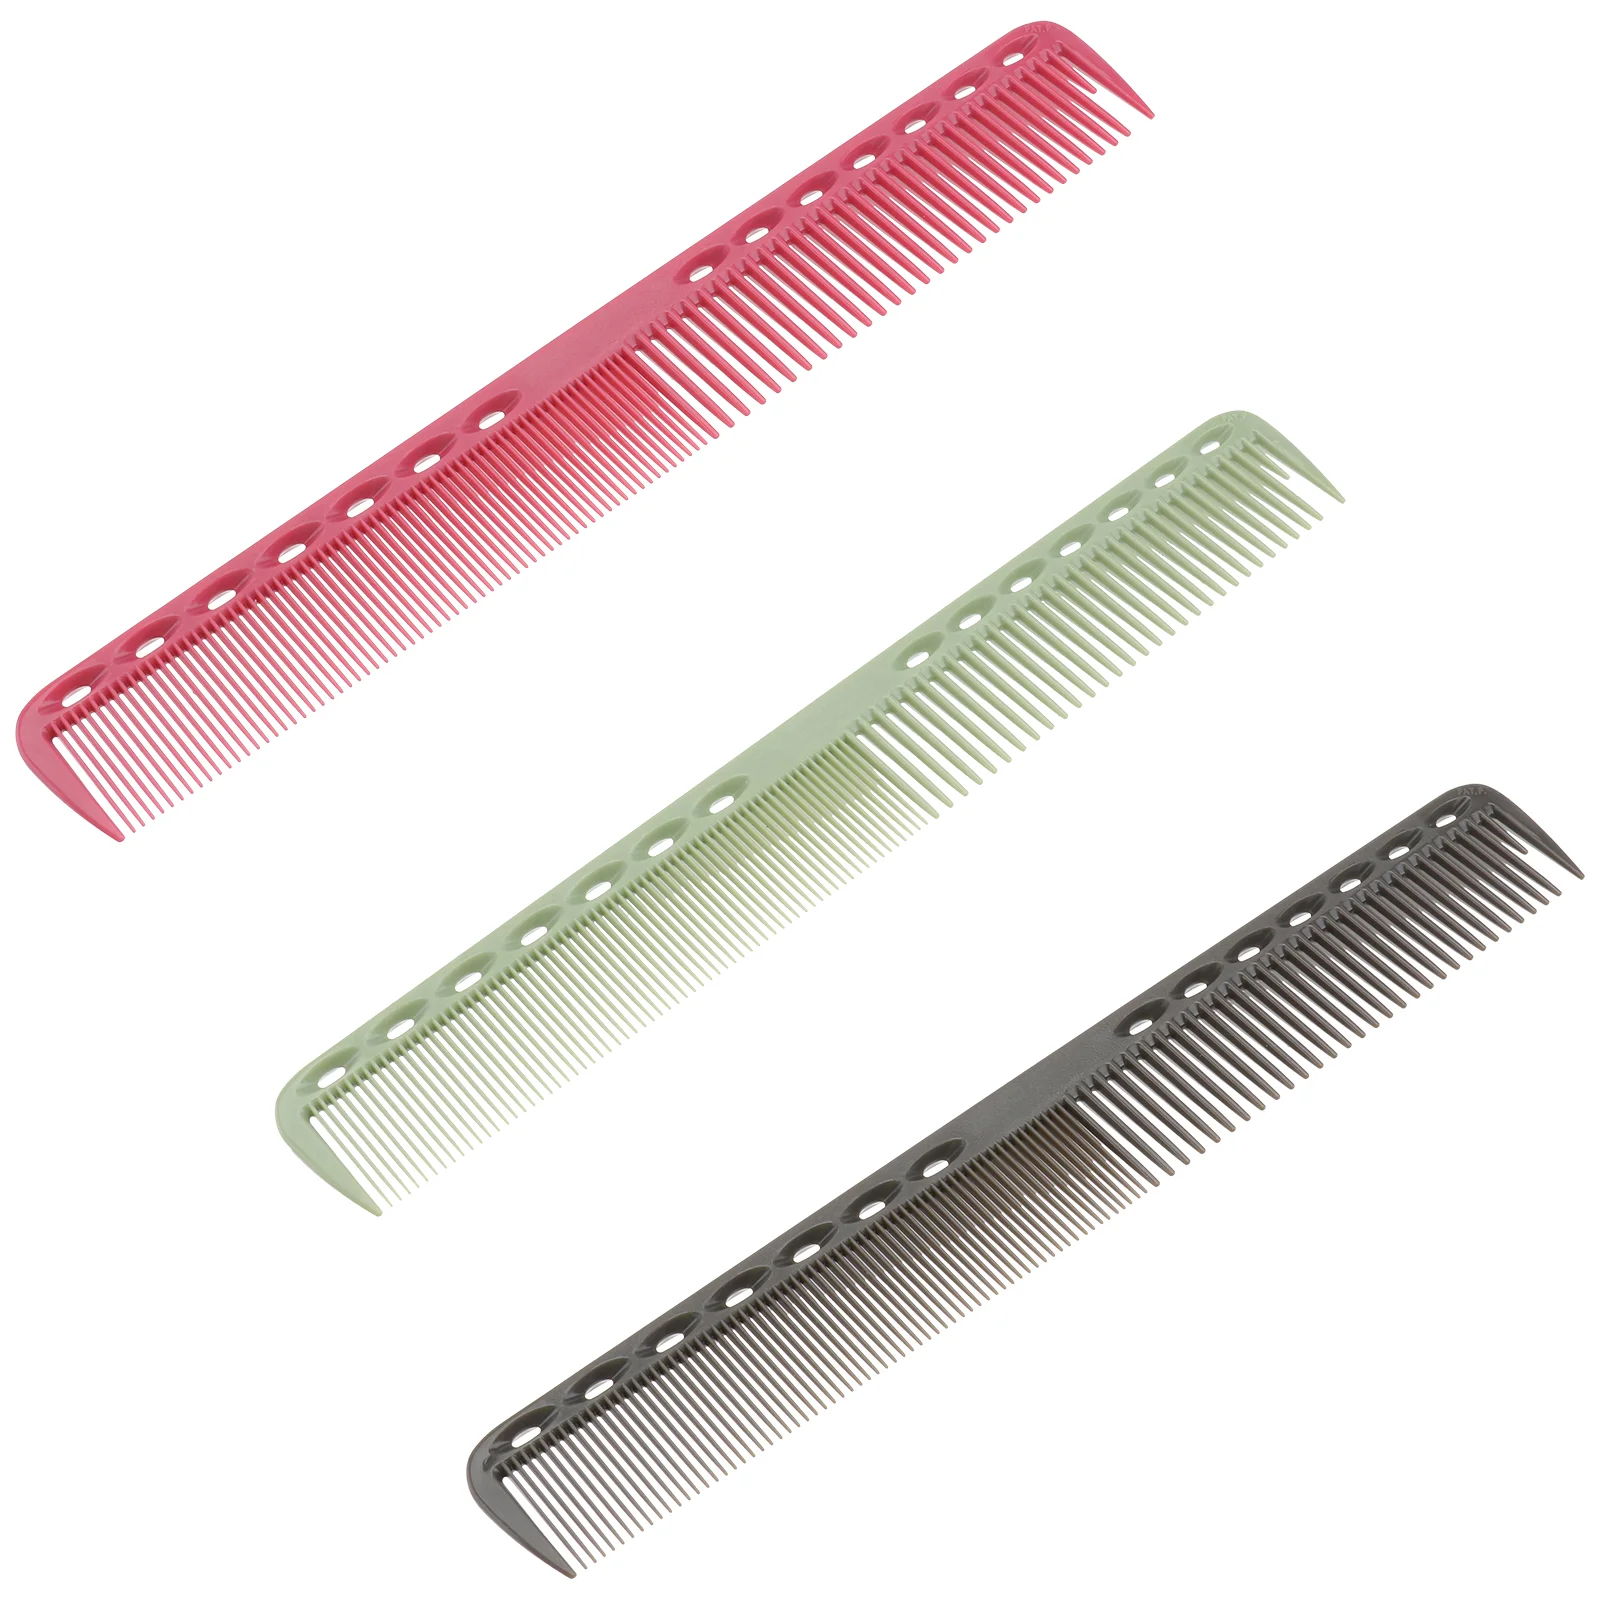 

3 Pcs Barber Comb Haircut Teasing Combs Women Professional Ladies Suits Modeling